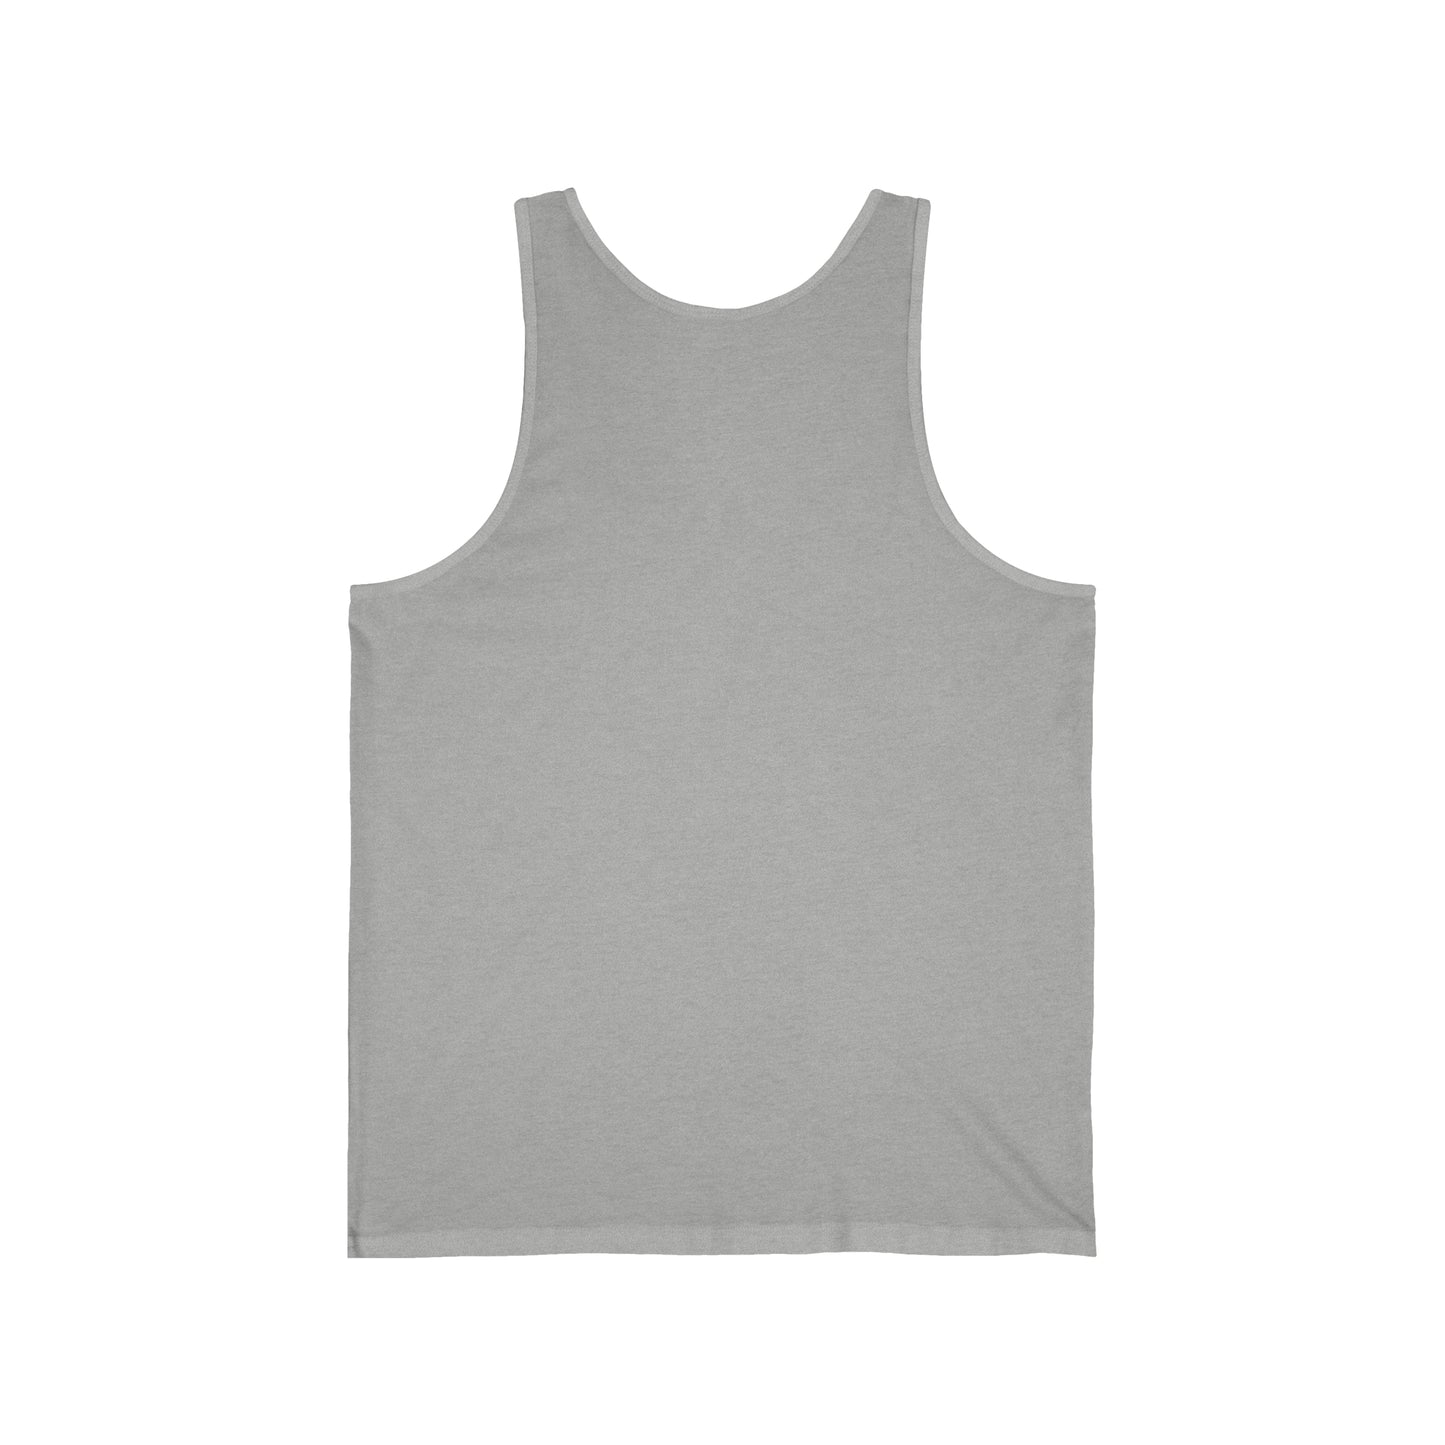 Leaning Towers of Bush Unisex Tank Top